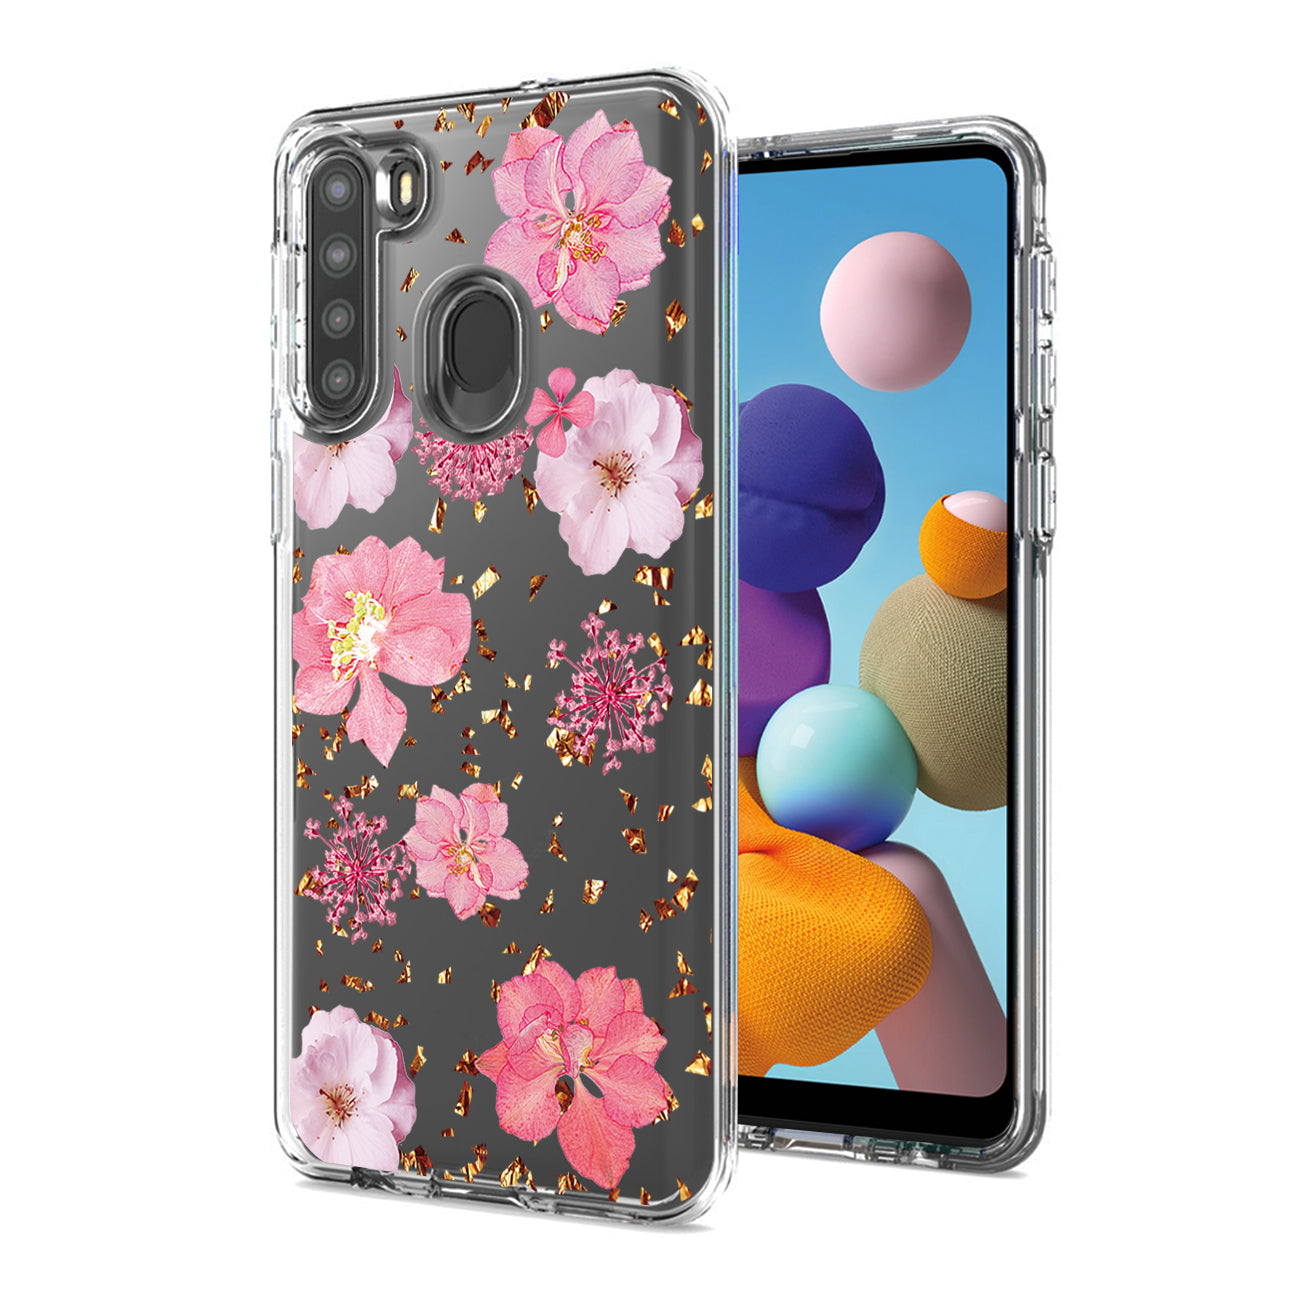 Pressed dried flower Design Phone case for SAMSUNG GALAXY A21 in Pink